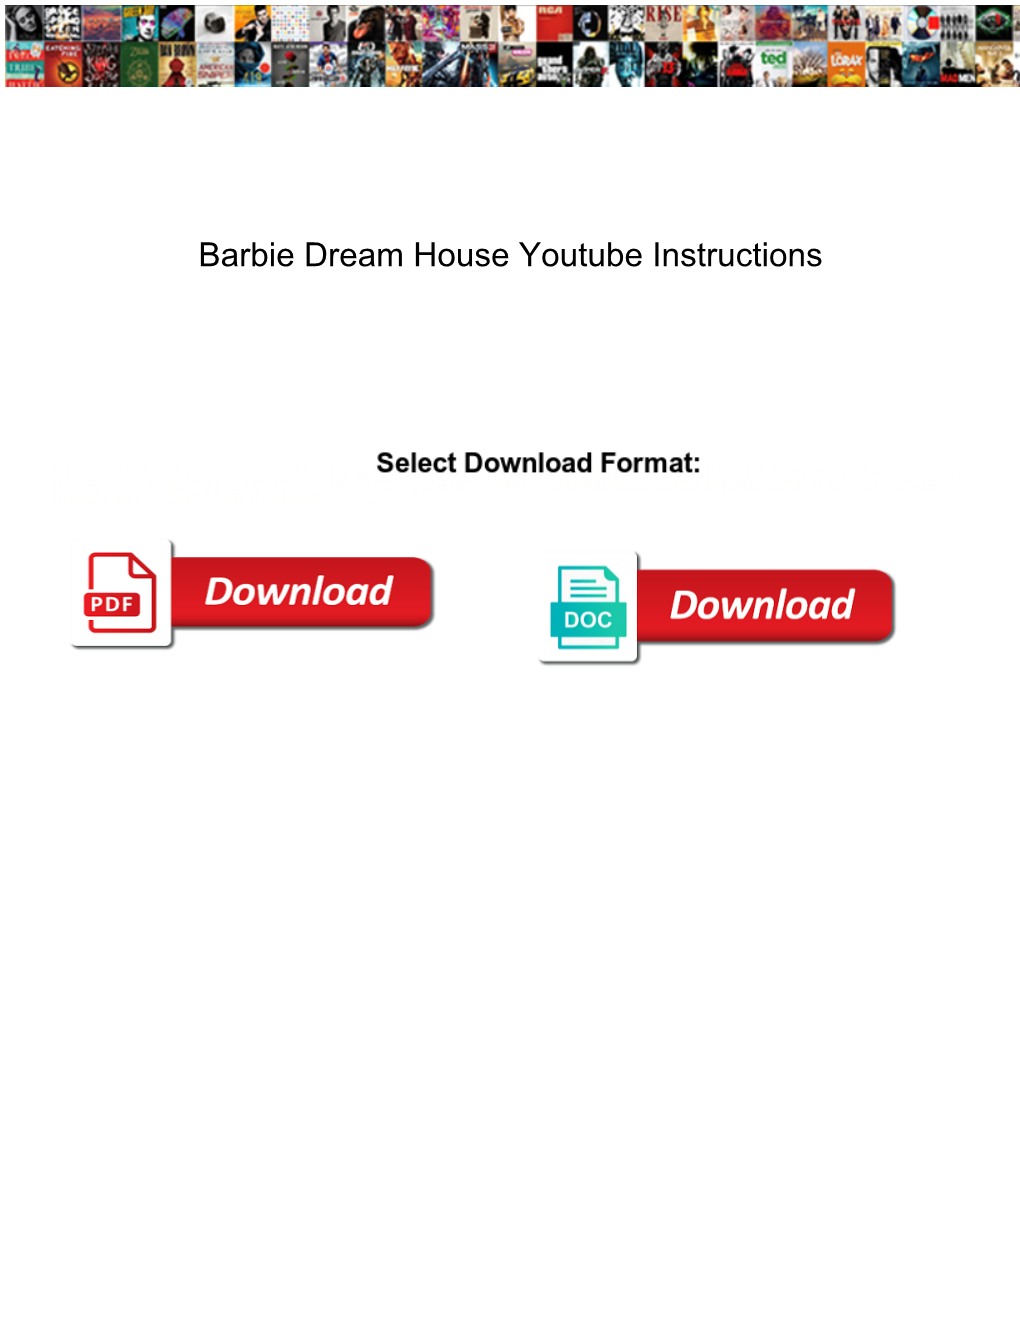 Barbie Dream House Youtube Instructions